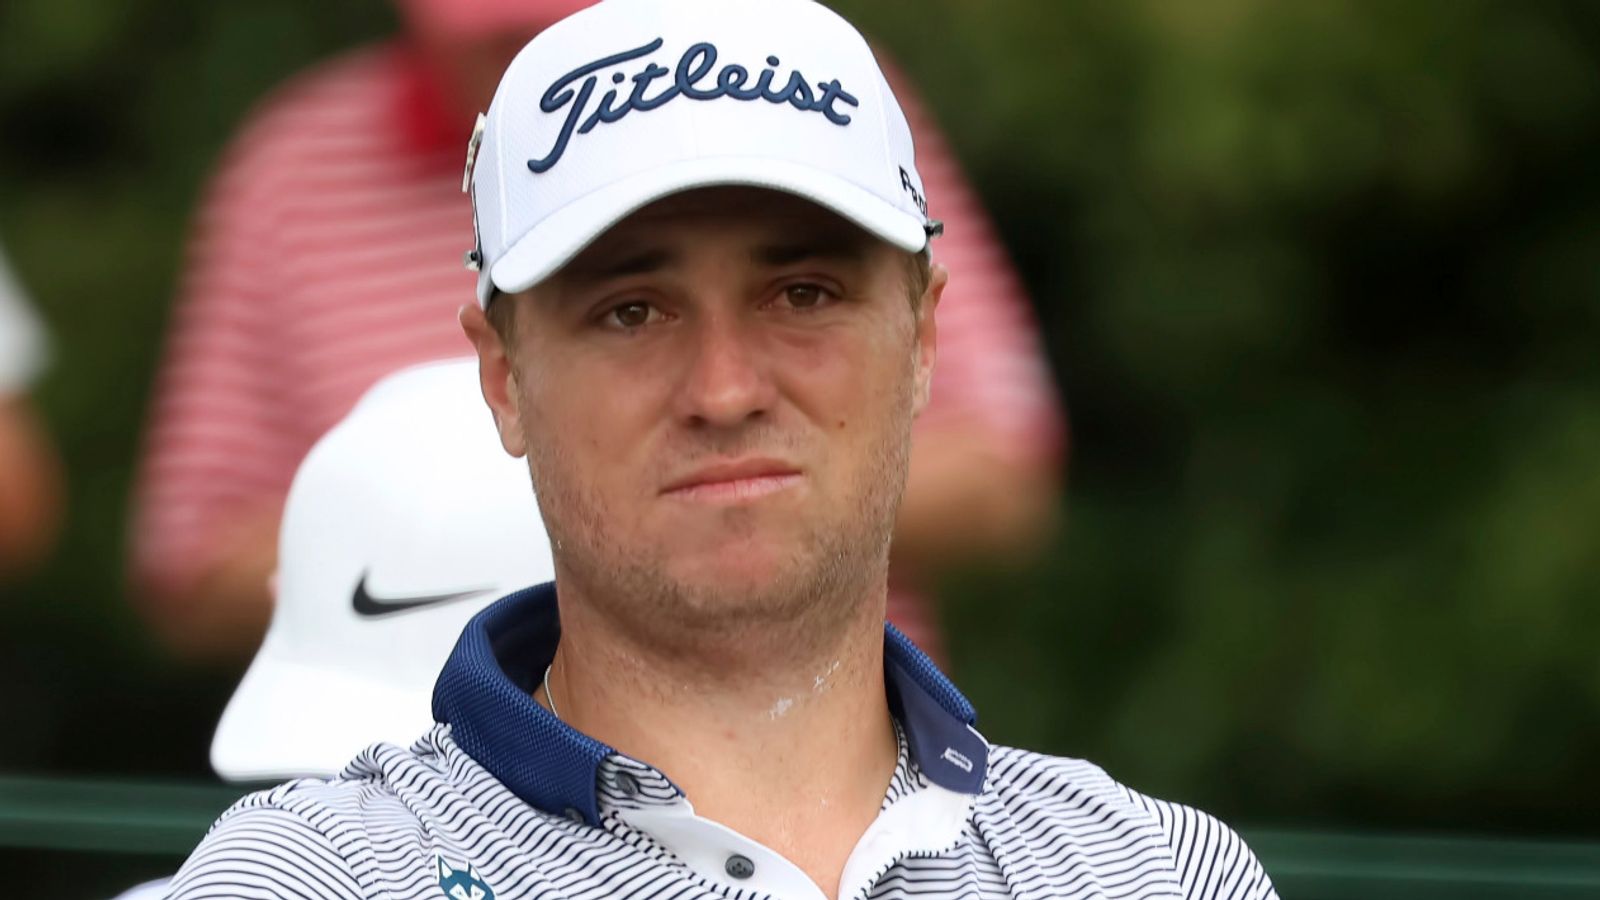 Justin Thomas: LIV Golf player complaints over world ranking points ‘their own fault’